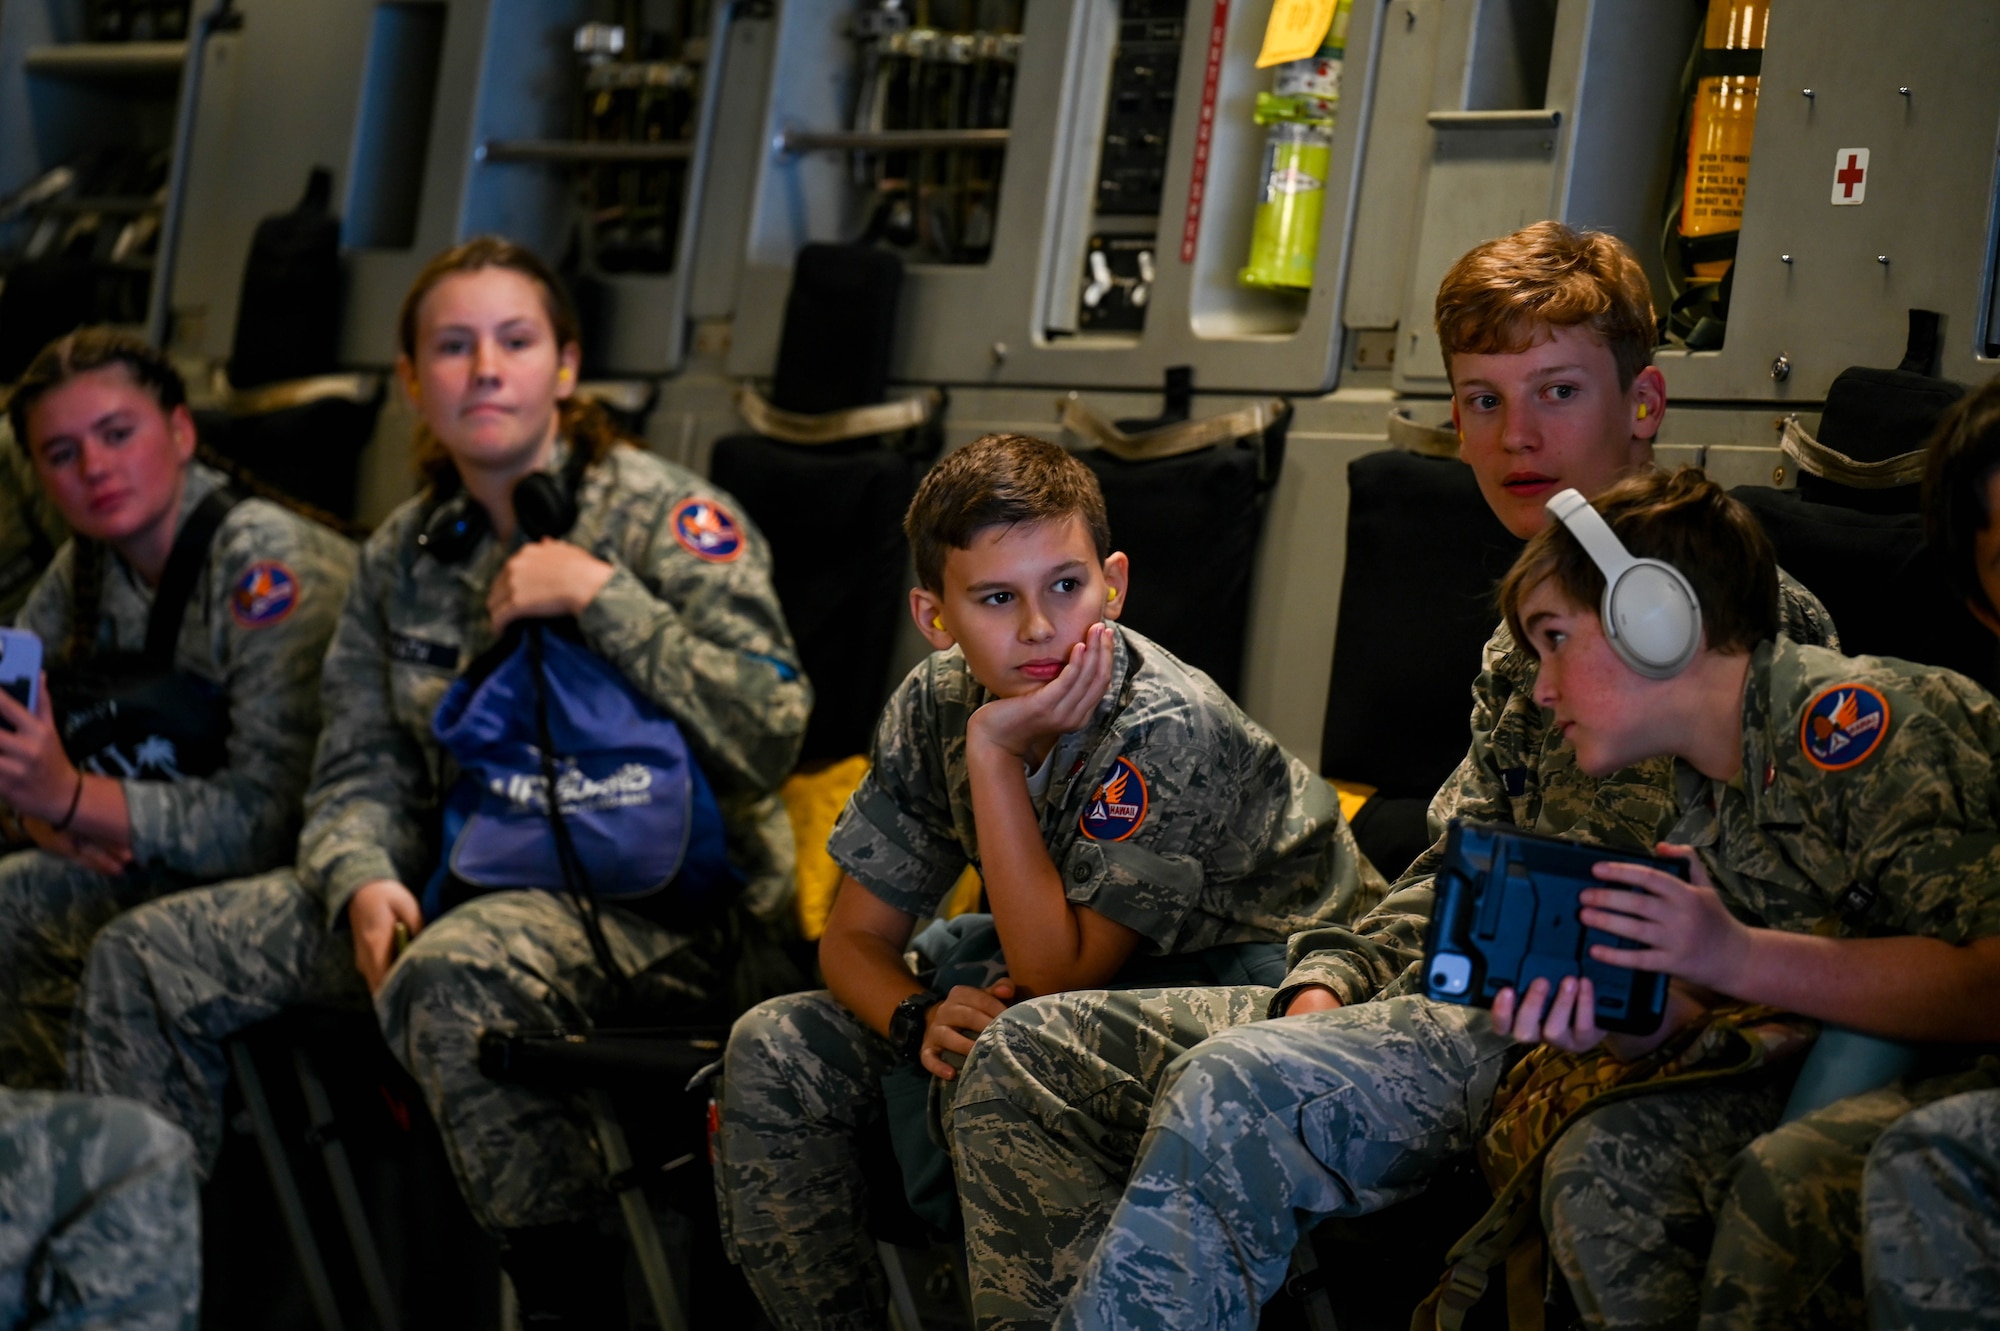 Kids sitting inside an aircraft looking around.